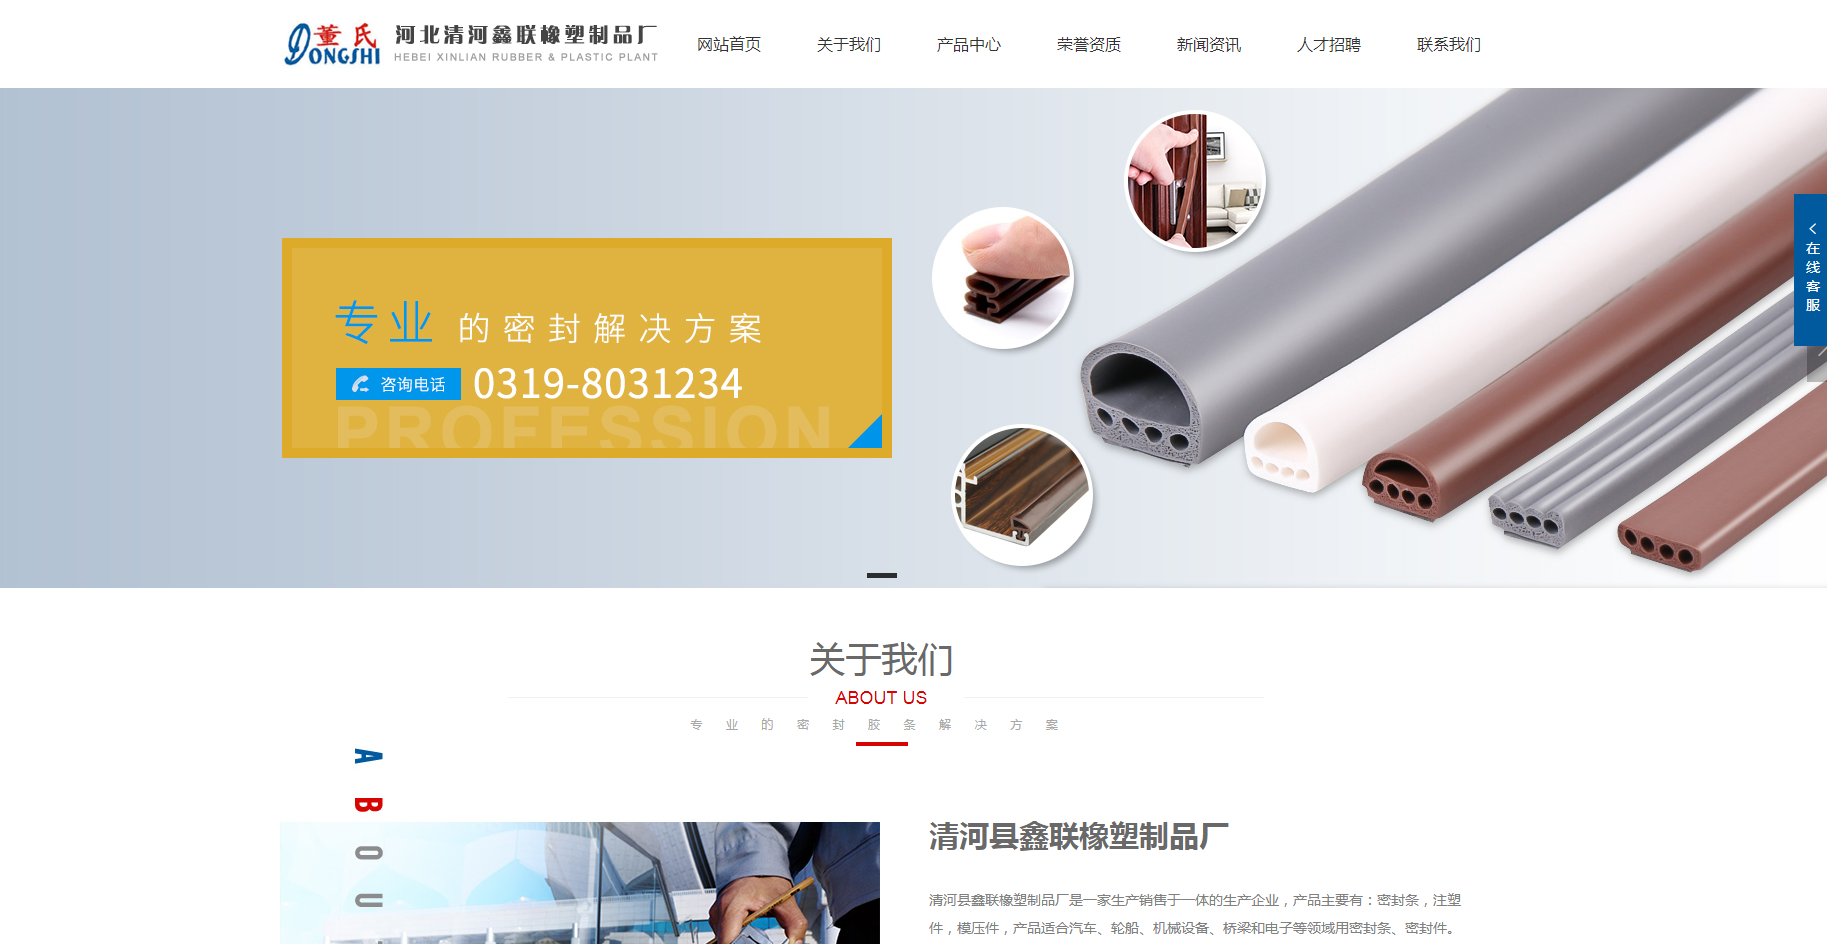 HEBEI XINLIAN RUBBER & PLASTIC PLANT website officially launched!